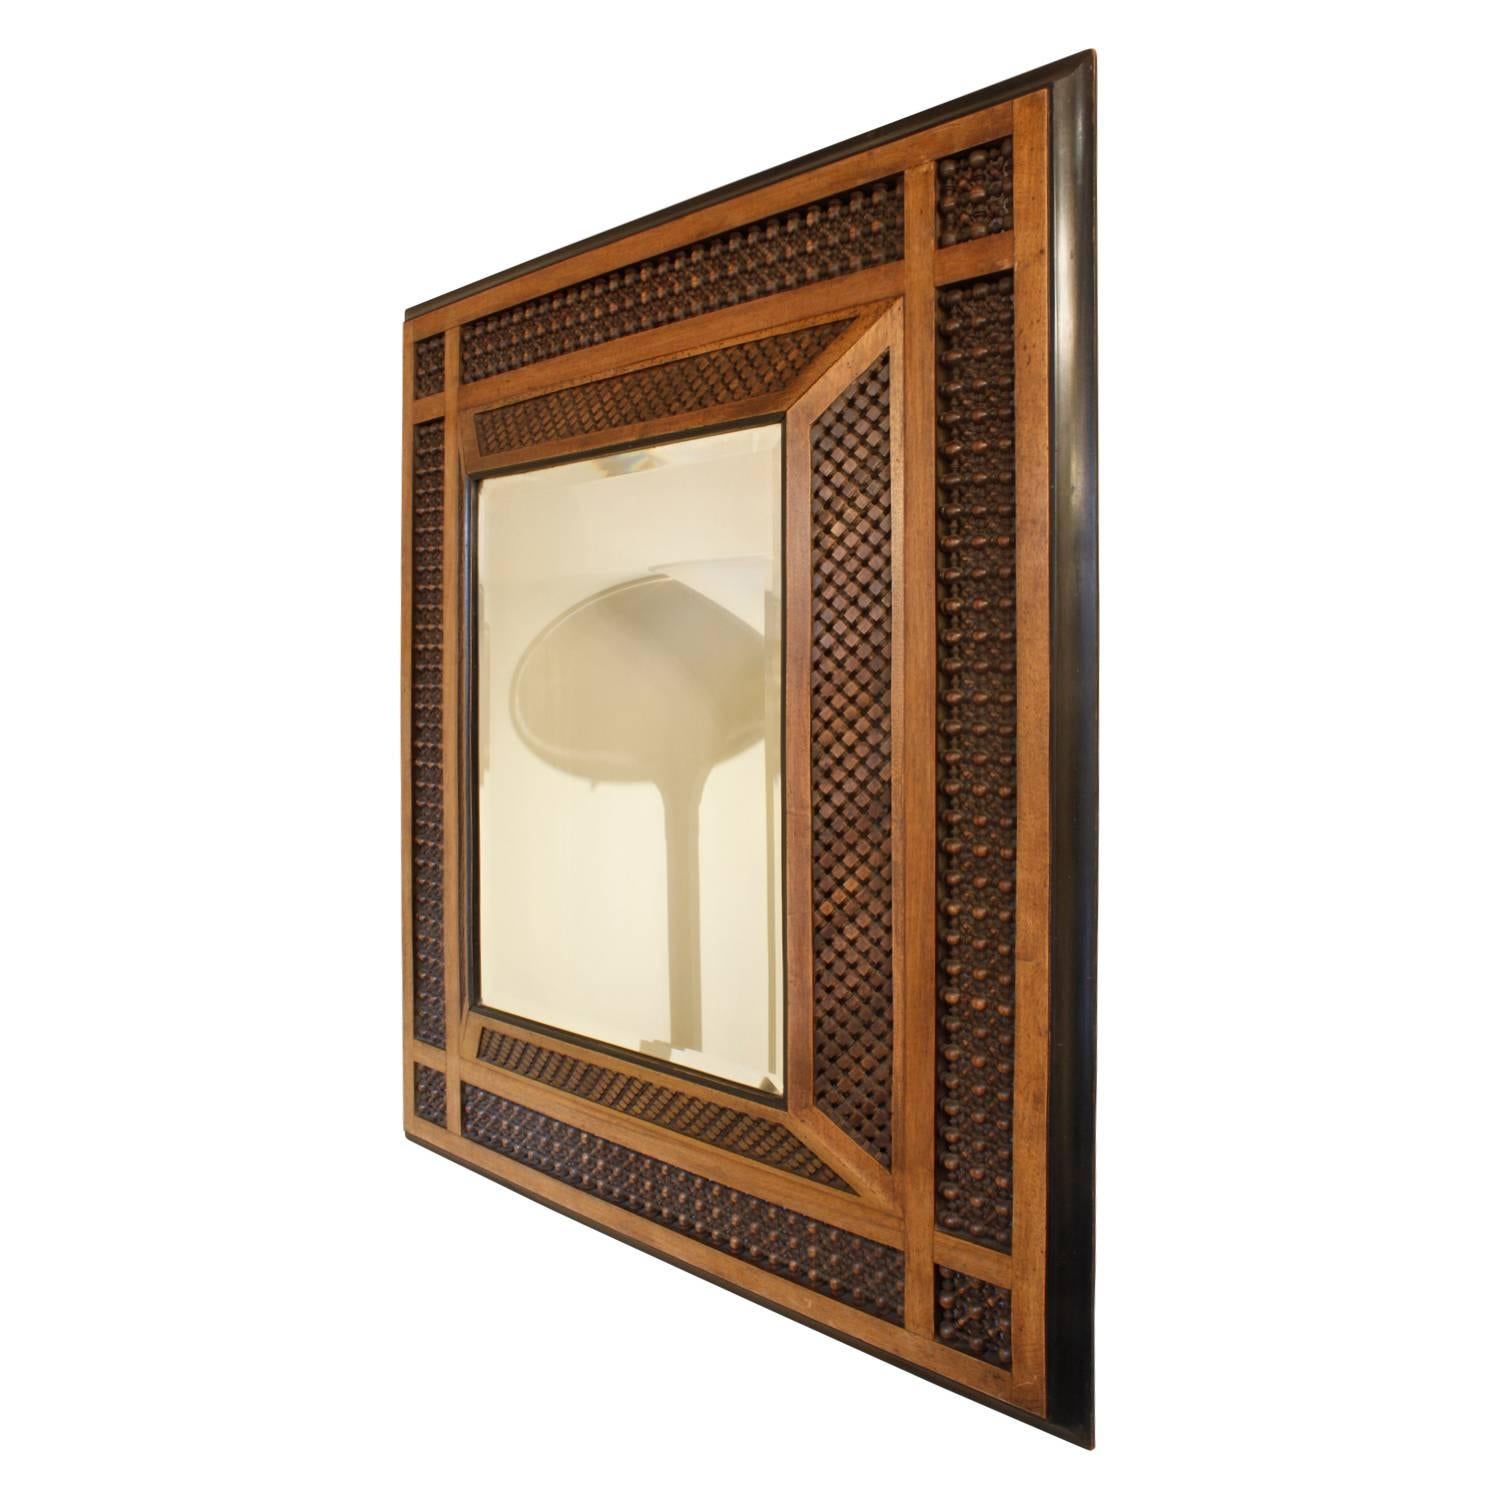 Beautifully hand-carved wood frame with intricate design and raised mirror, Morocco, 1950s.